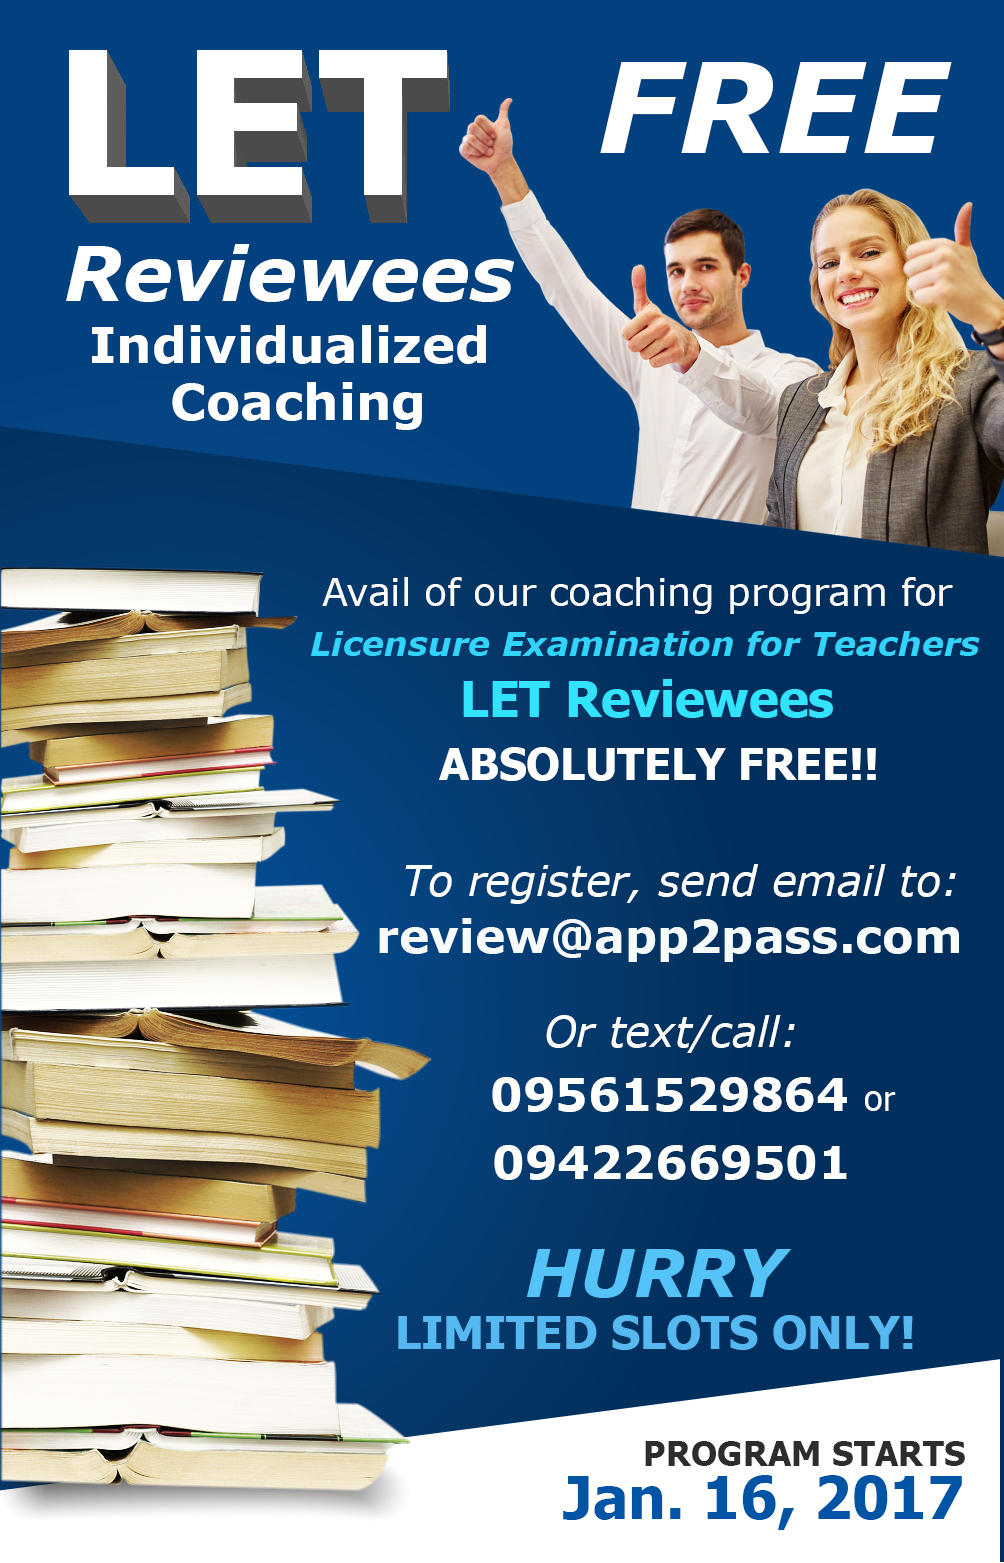 LET Reviewees Invidualized Coaching